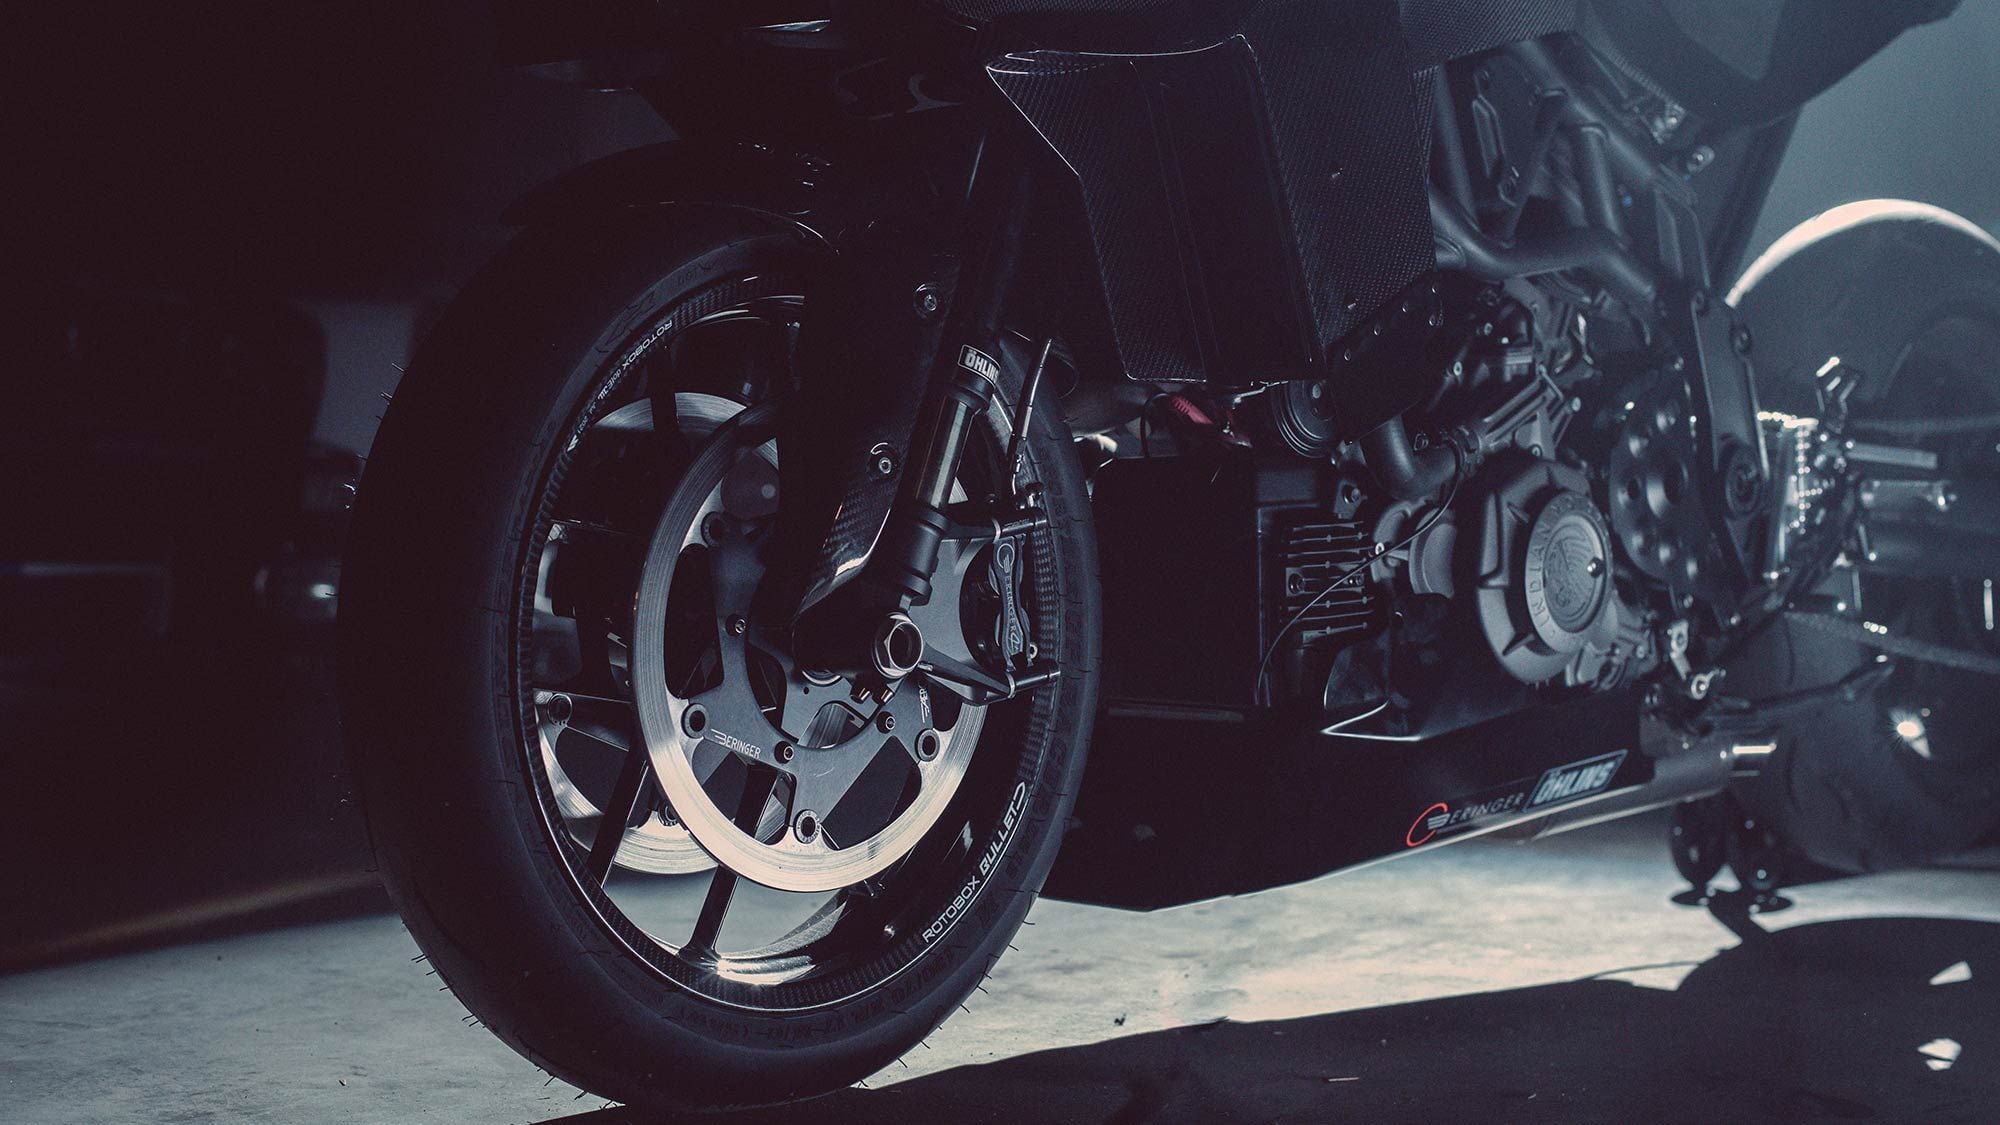 Darkened Öhlins suspension and carbon highlight the front of this Black Swan.